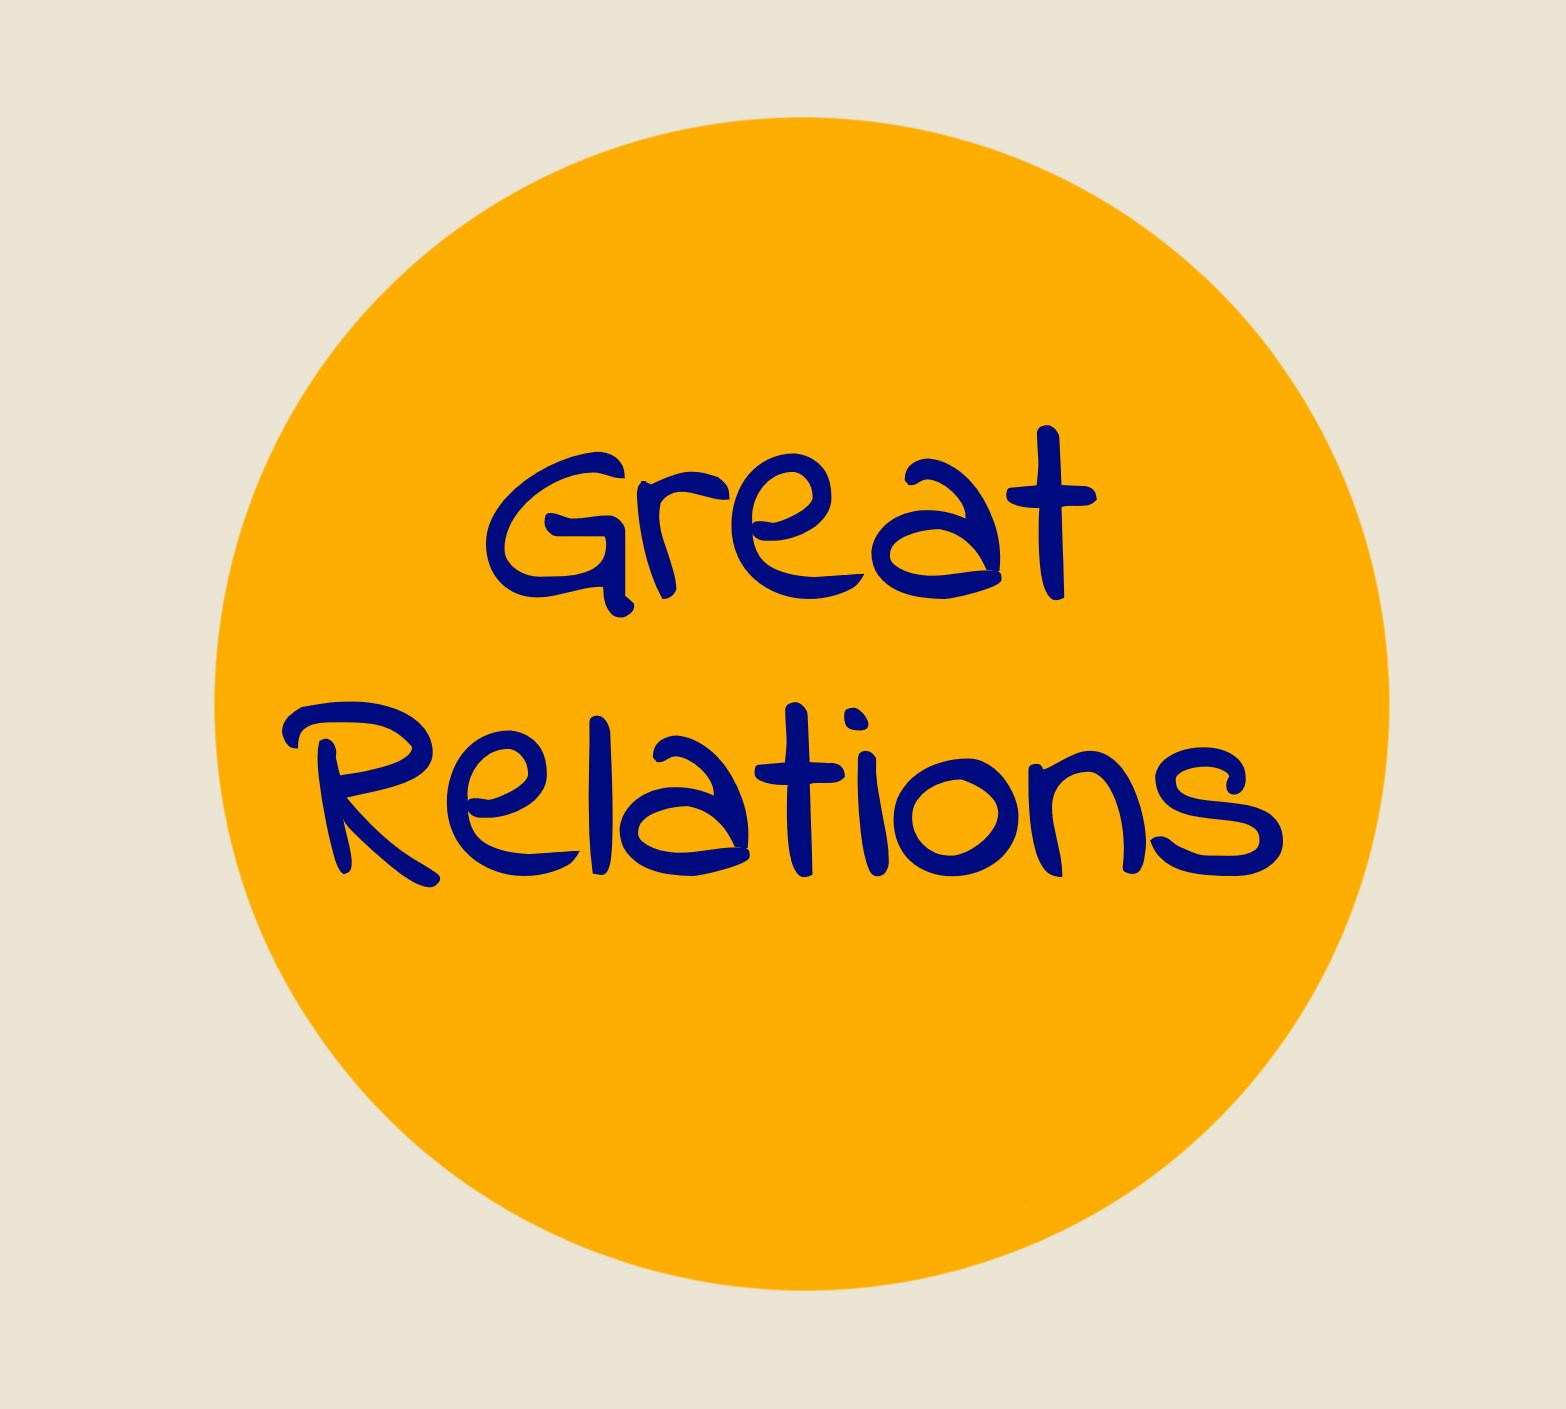 Great Relations logo